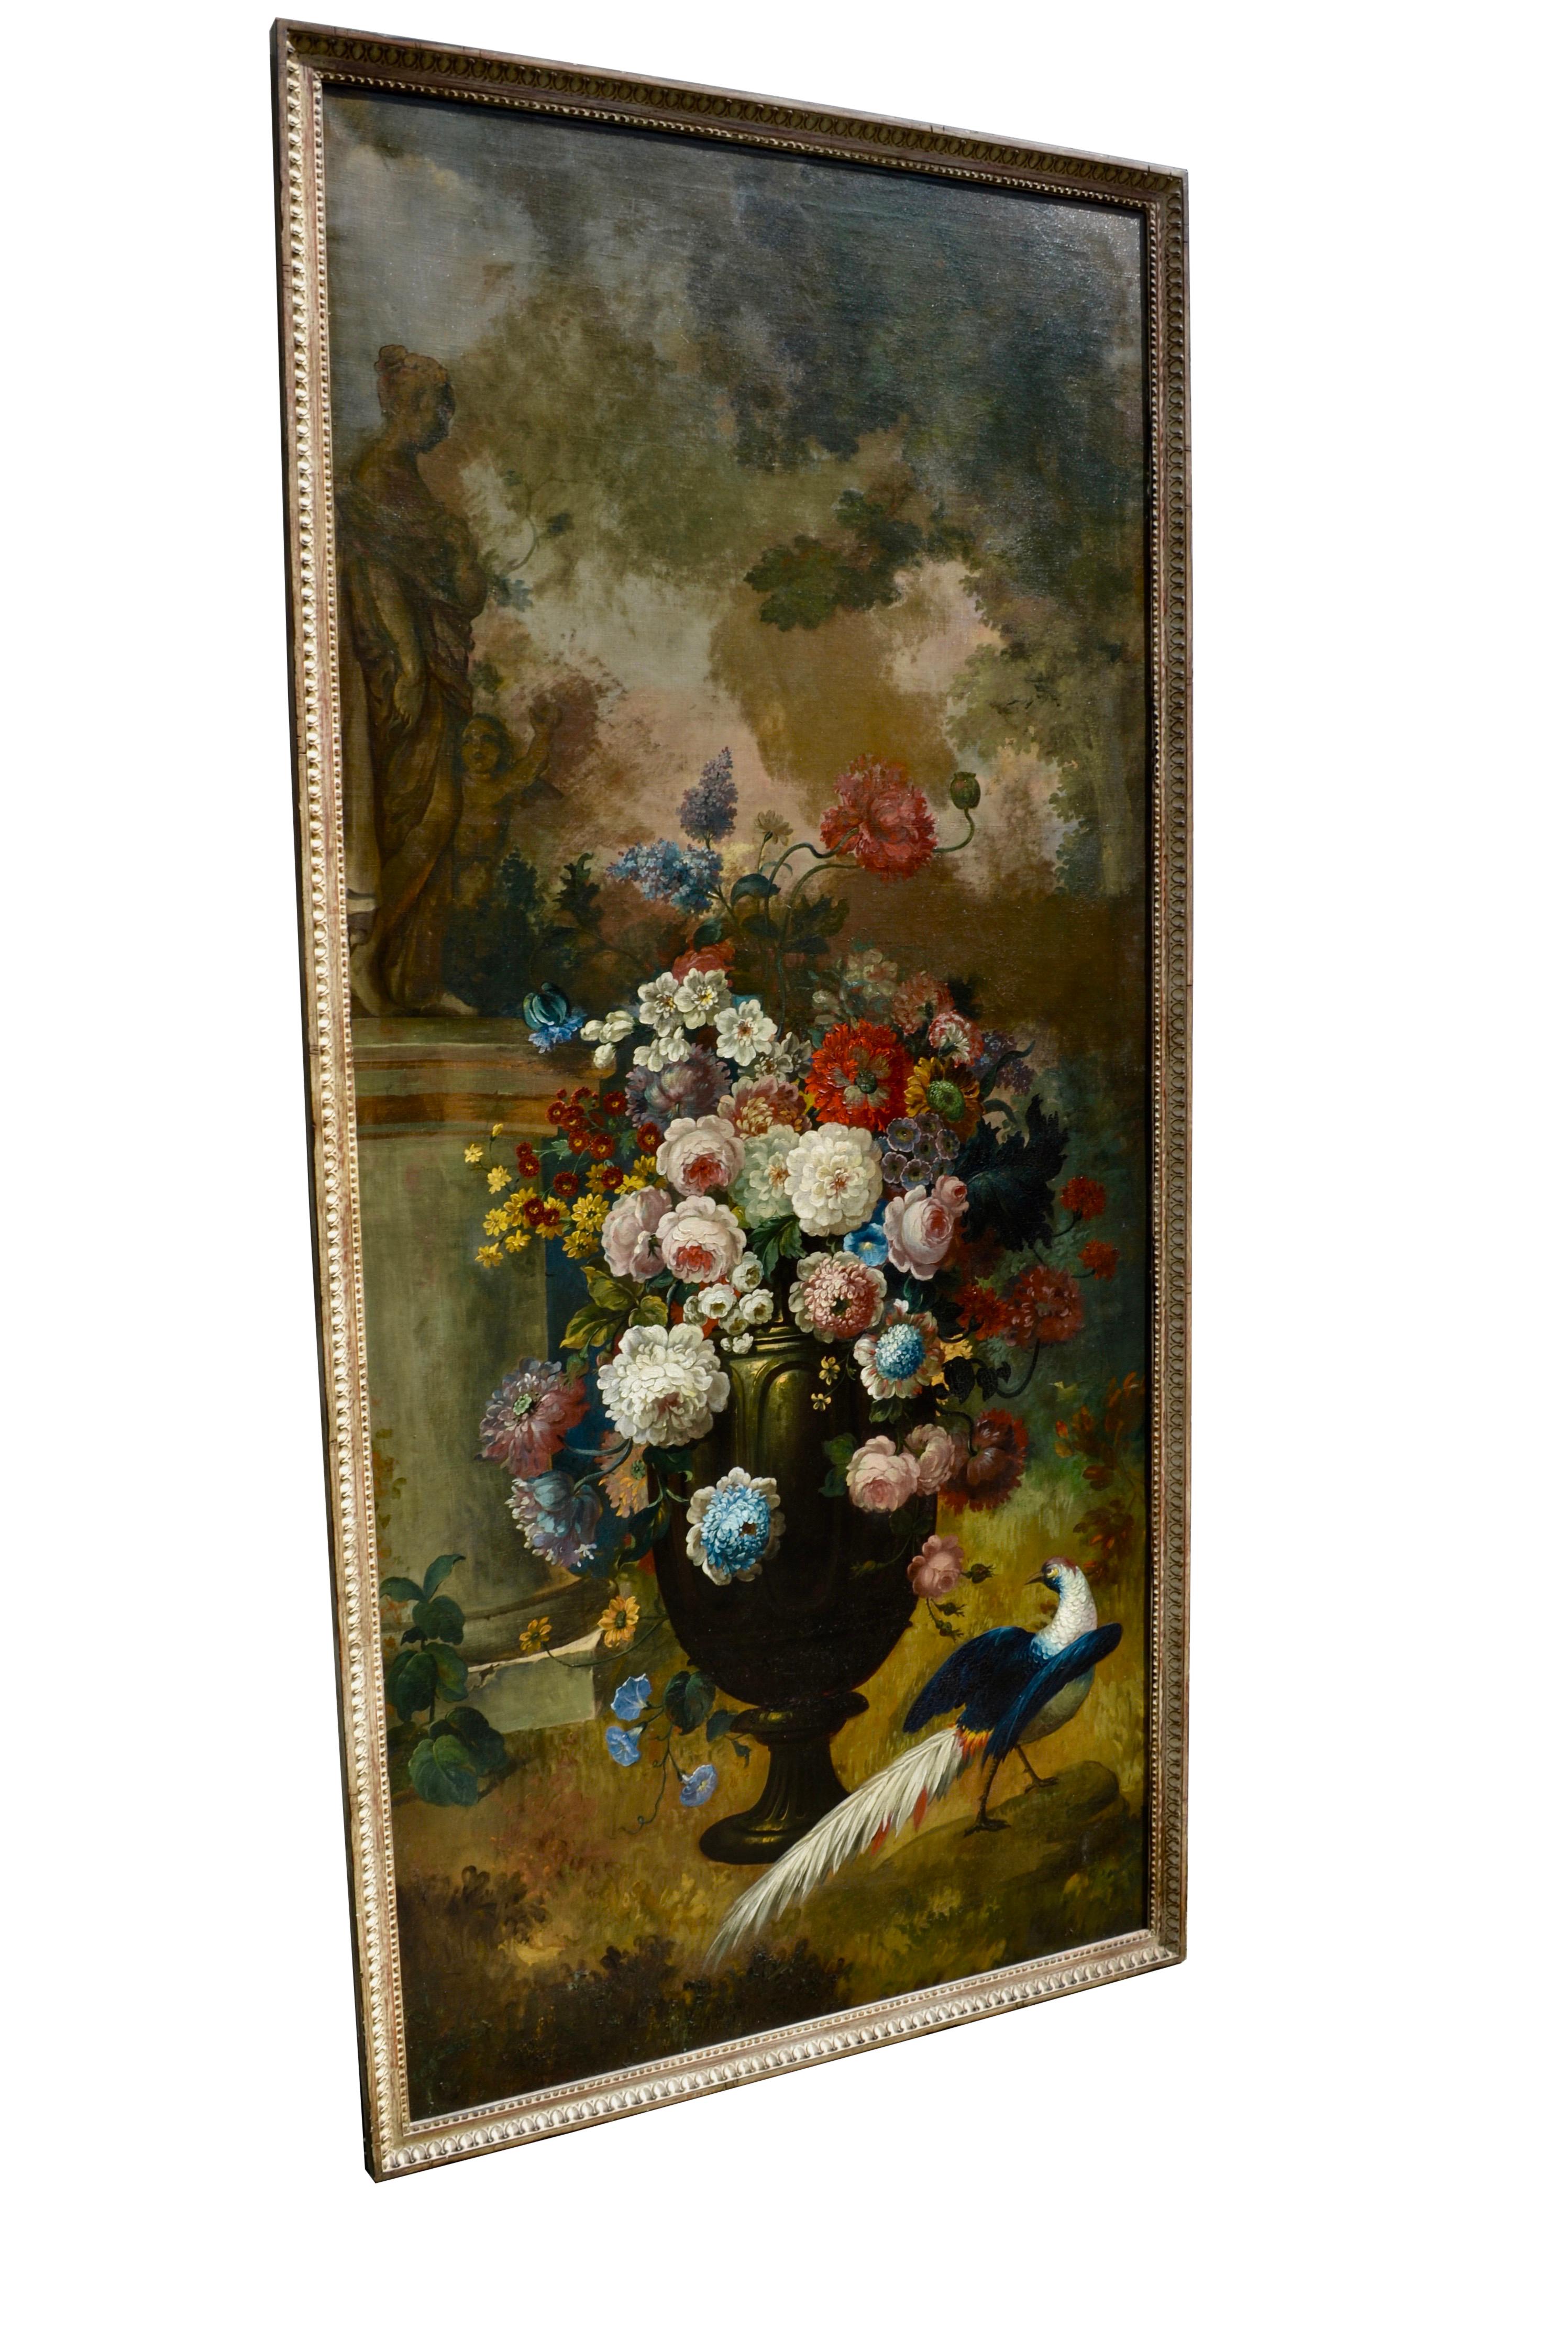 A tall impressive and very decorative oil painting on canvas depicting an arrangement of multi-coloured flowers in a classical urn. At the bottom of the urn is a peacock. The top left hand side of the painting shows a young classical maiden with a